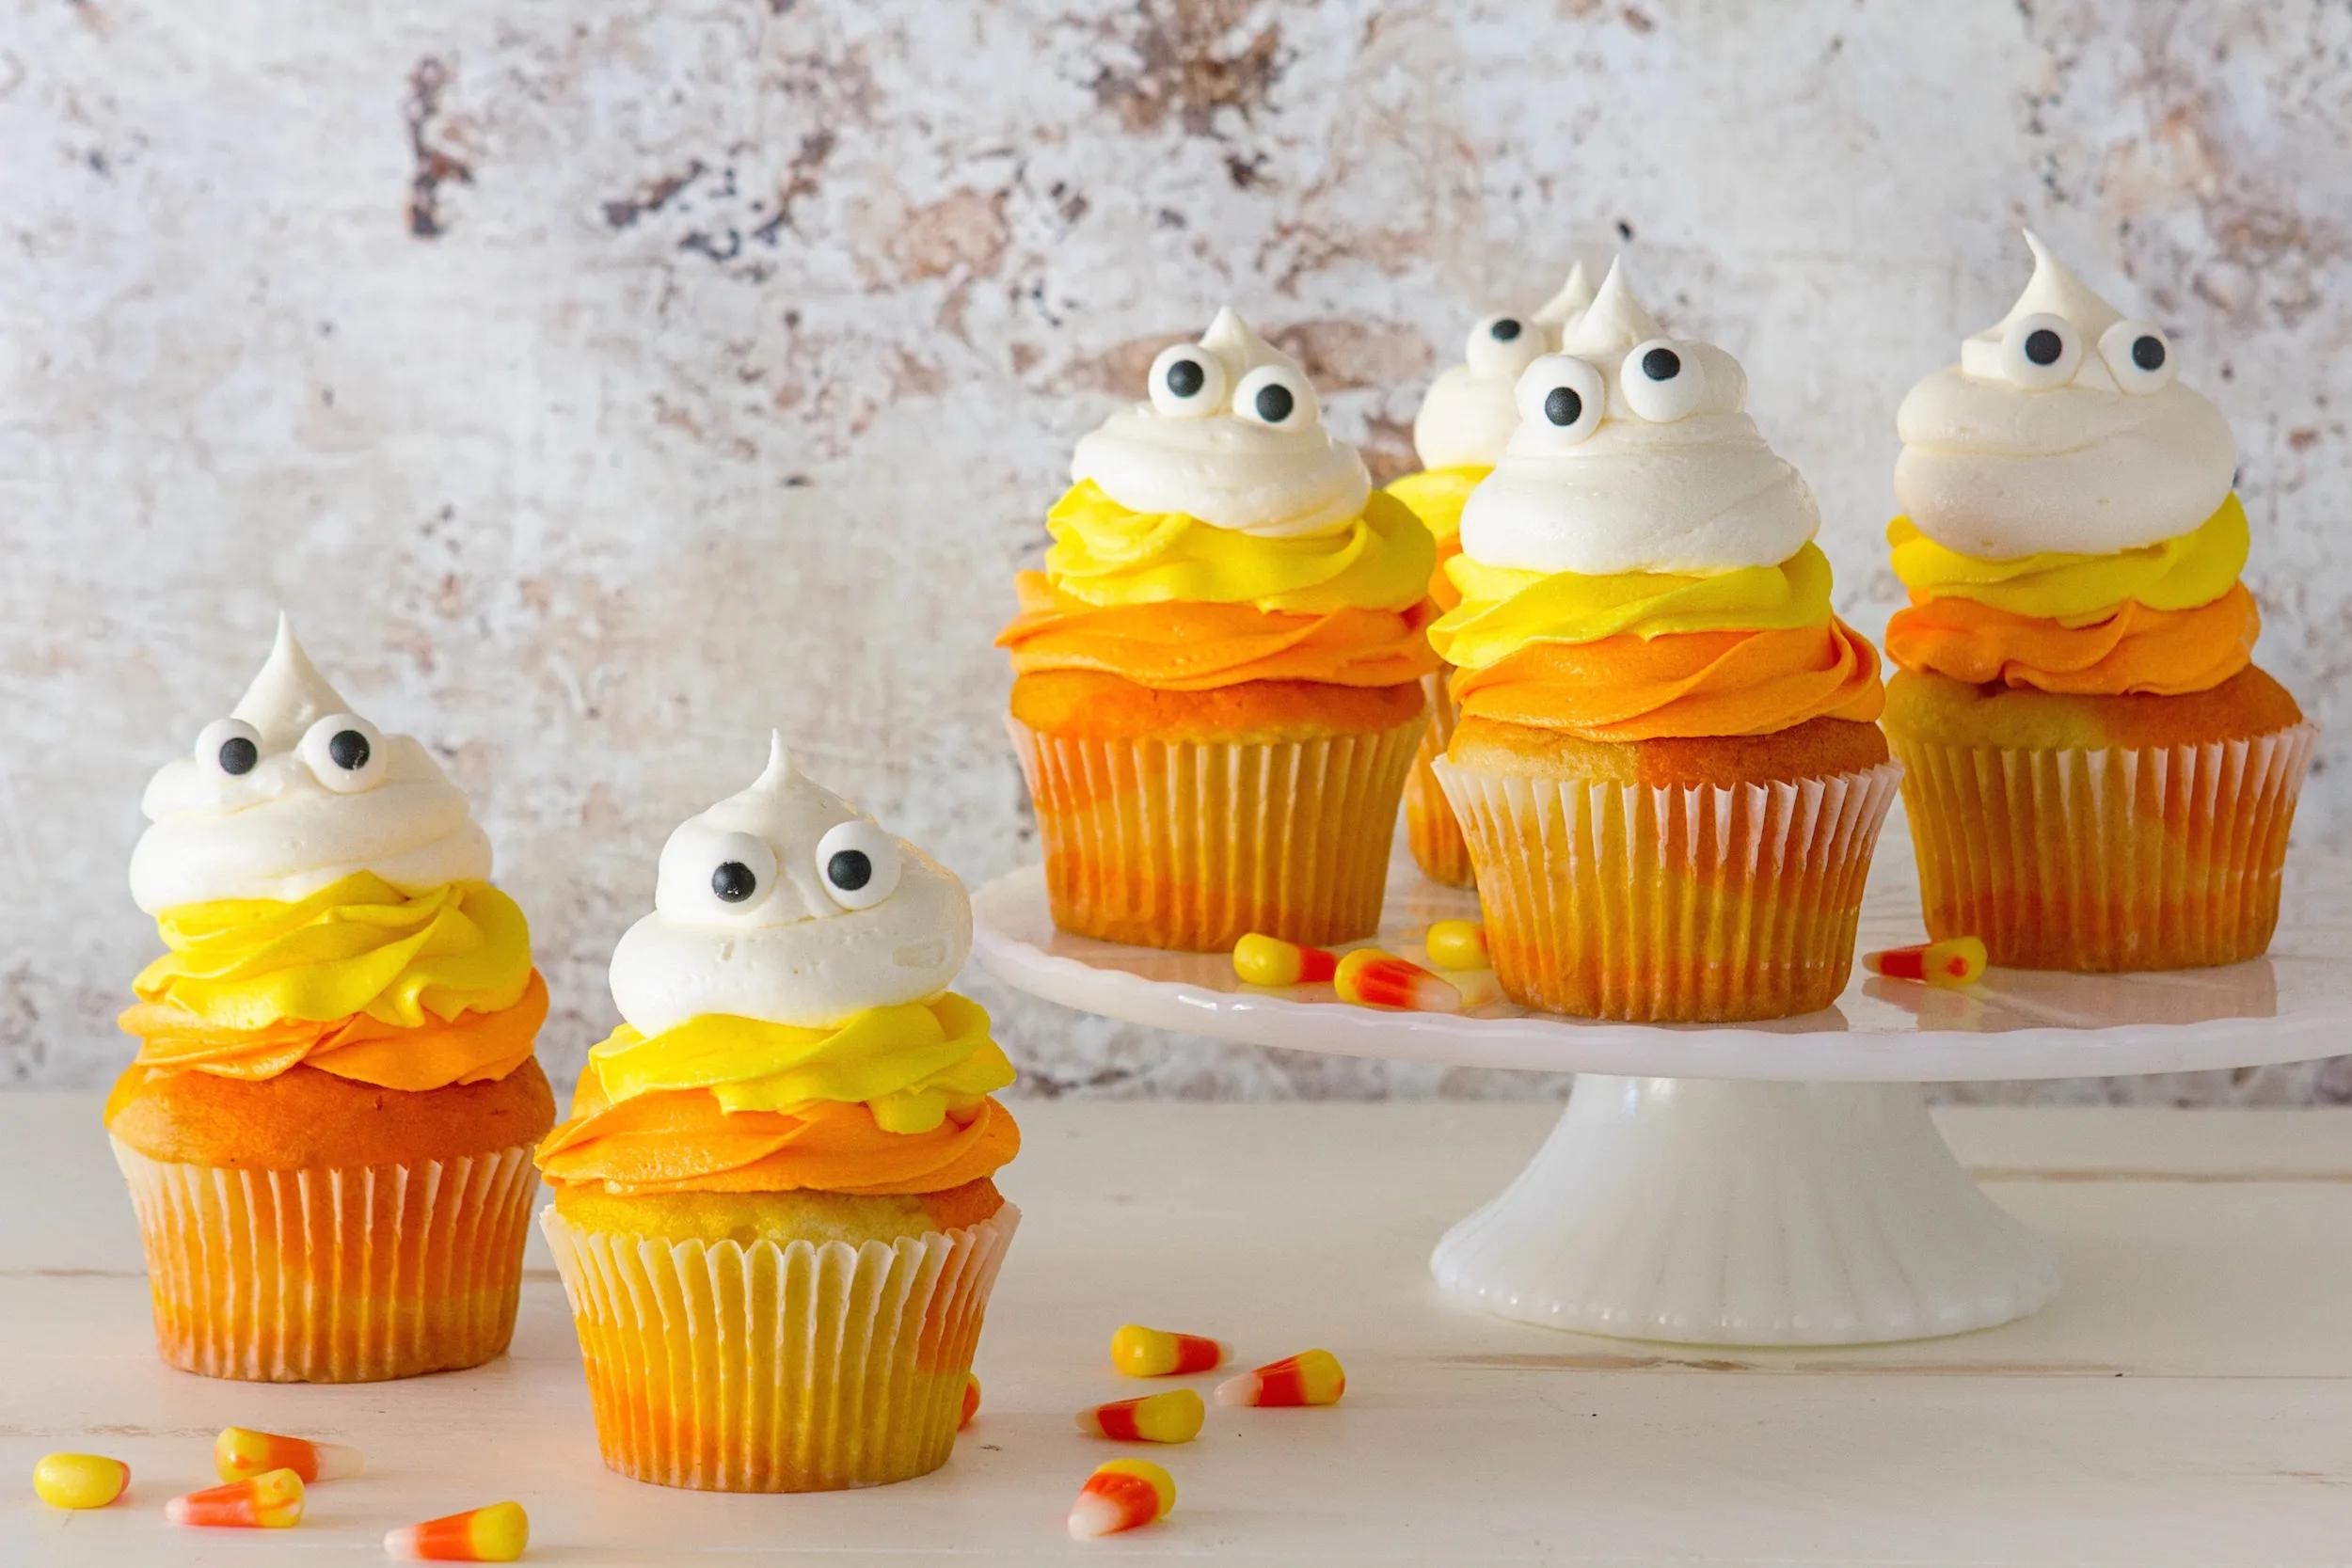 18 Easy Halloween Cupcake Ideas - Recipes &amp; Decorating Tips for ...